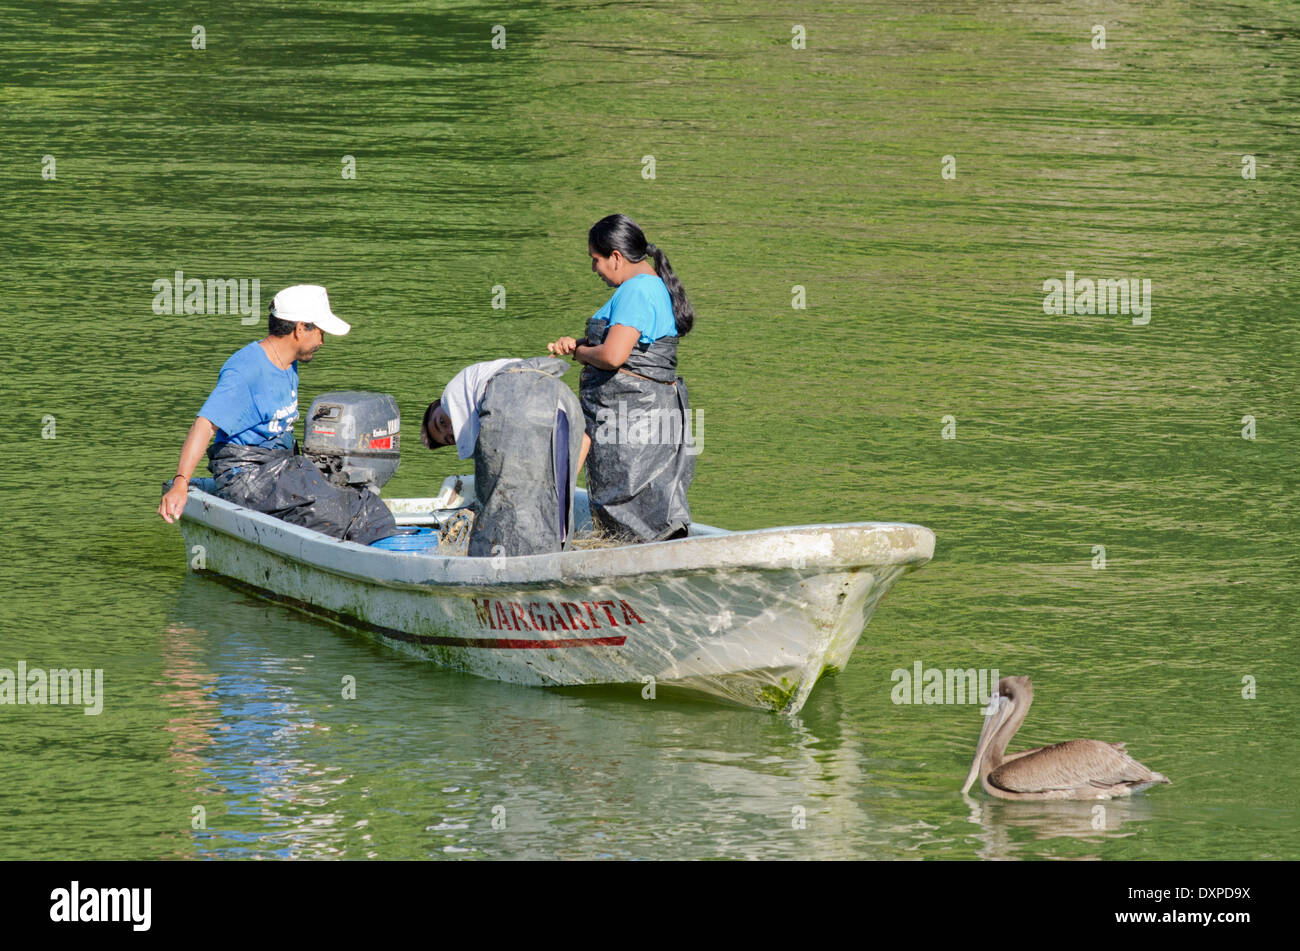 Guatemala, Department of Izabal, near Livingston, Rio Dulce (Sweet Water River). Traditional fishing boat on the Rio Dulce River Stock Photo